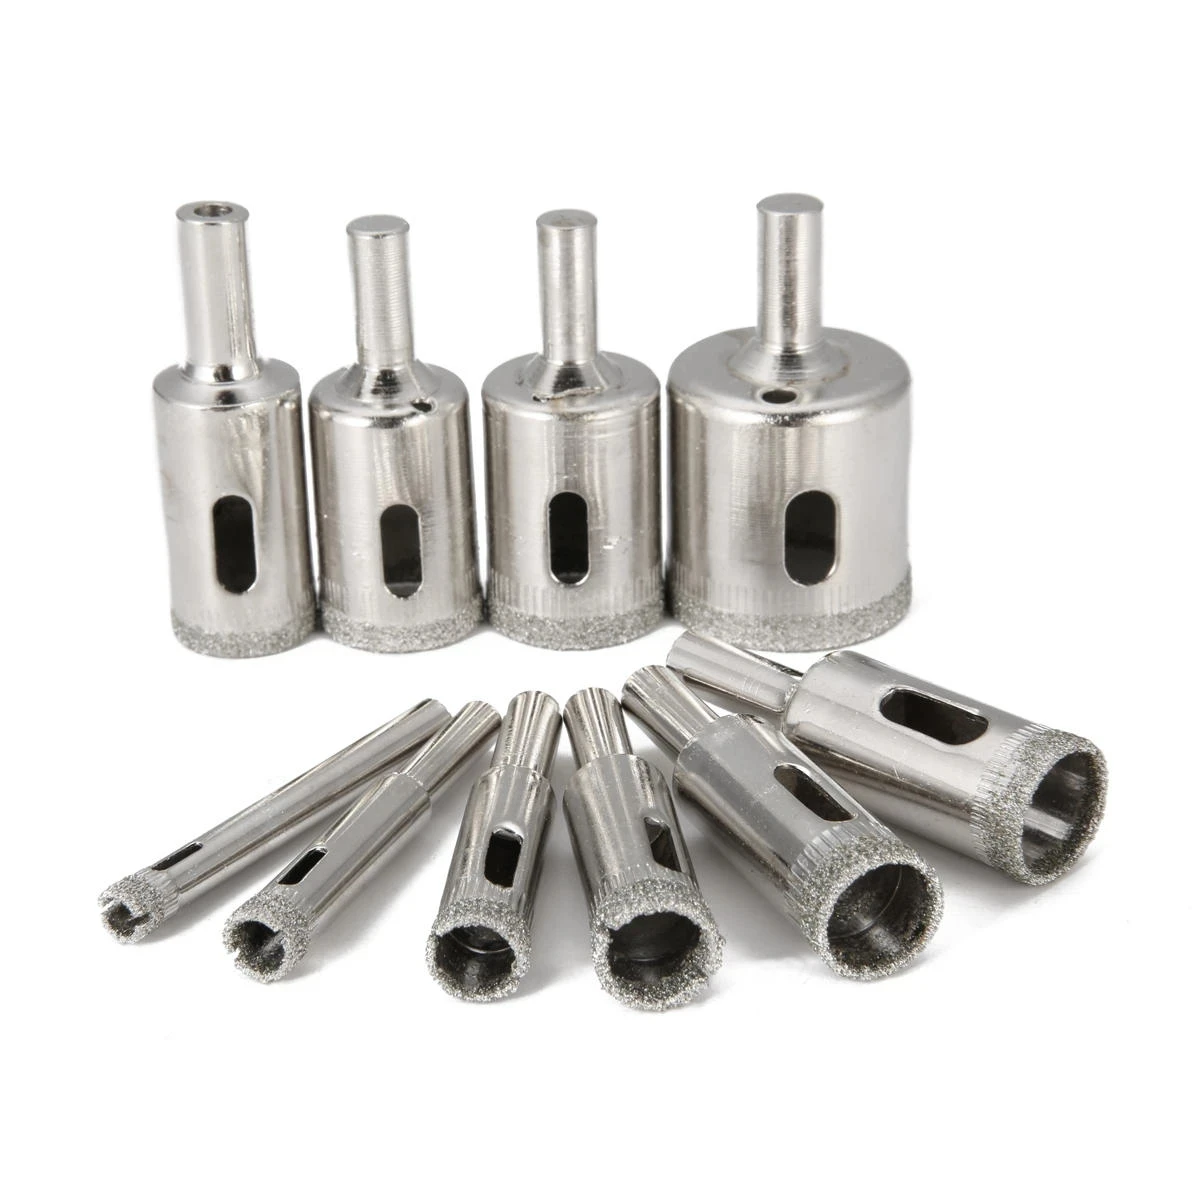 

10pcs Diamond Coated Drill Bit Set HSS Drill Bits Tile Marble Glass Ceramic Hole Saw Cutter Drilling Bits For Power Tools 6-30mm